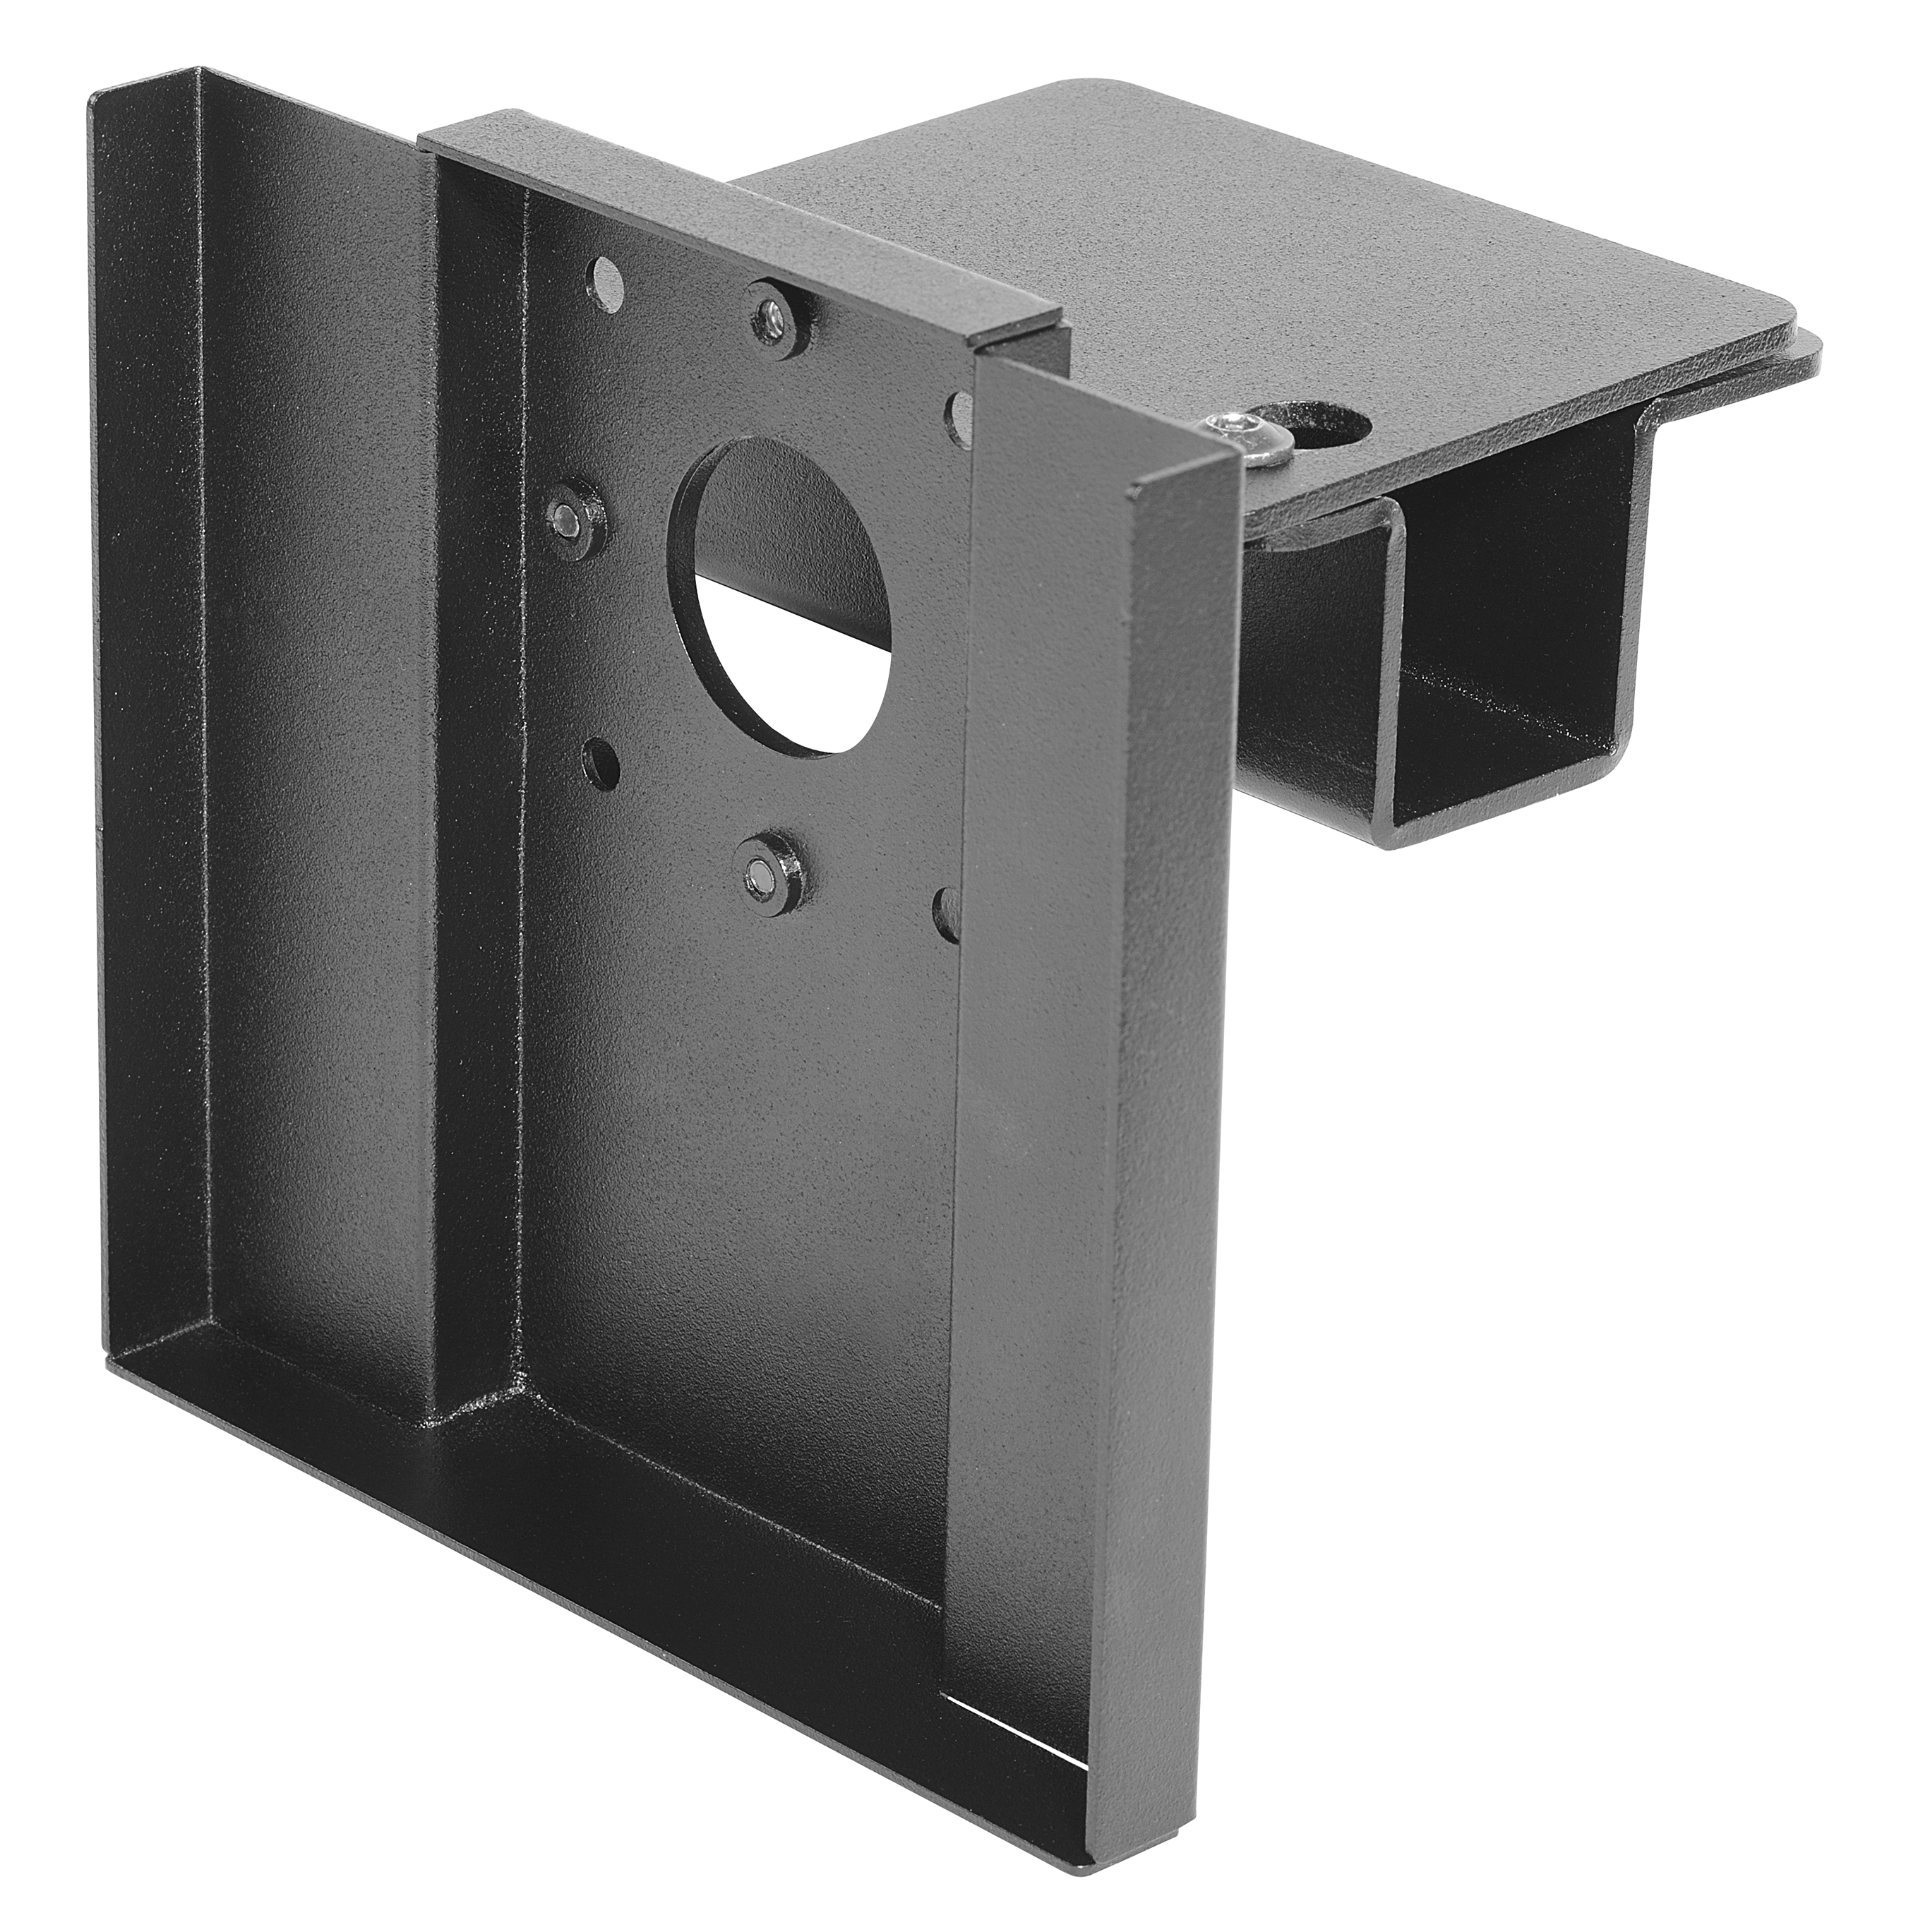 DSF210-SHC Flat Shelf Mount for Samsung DB10D Display with Rear Half Cover